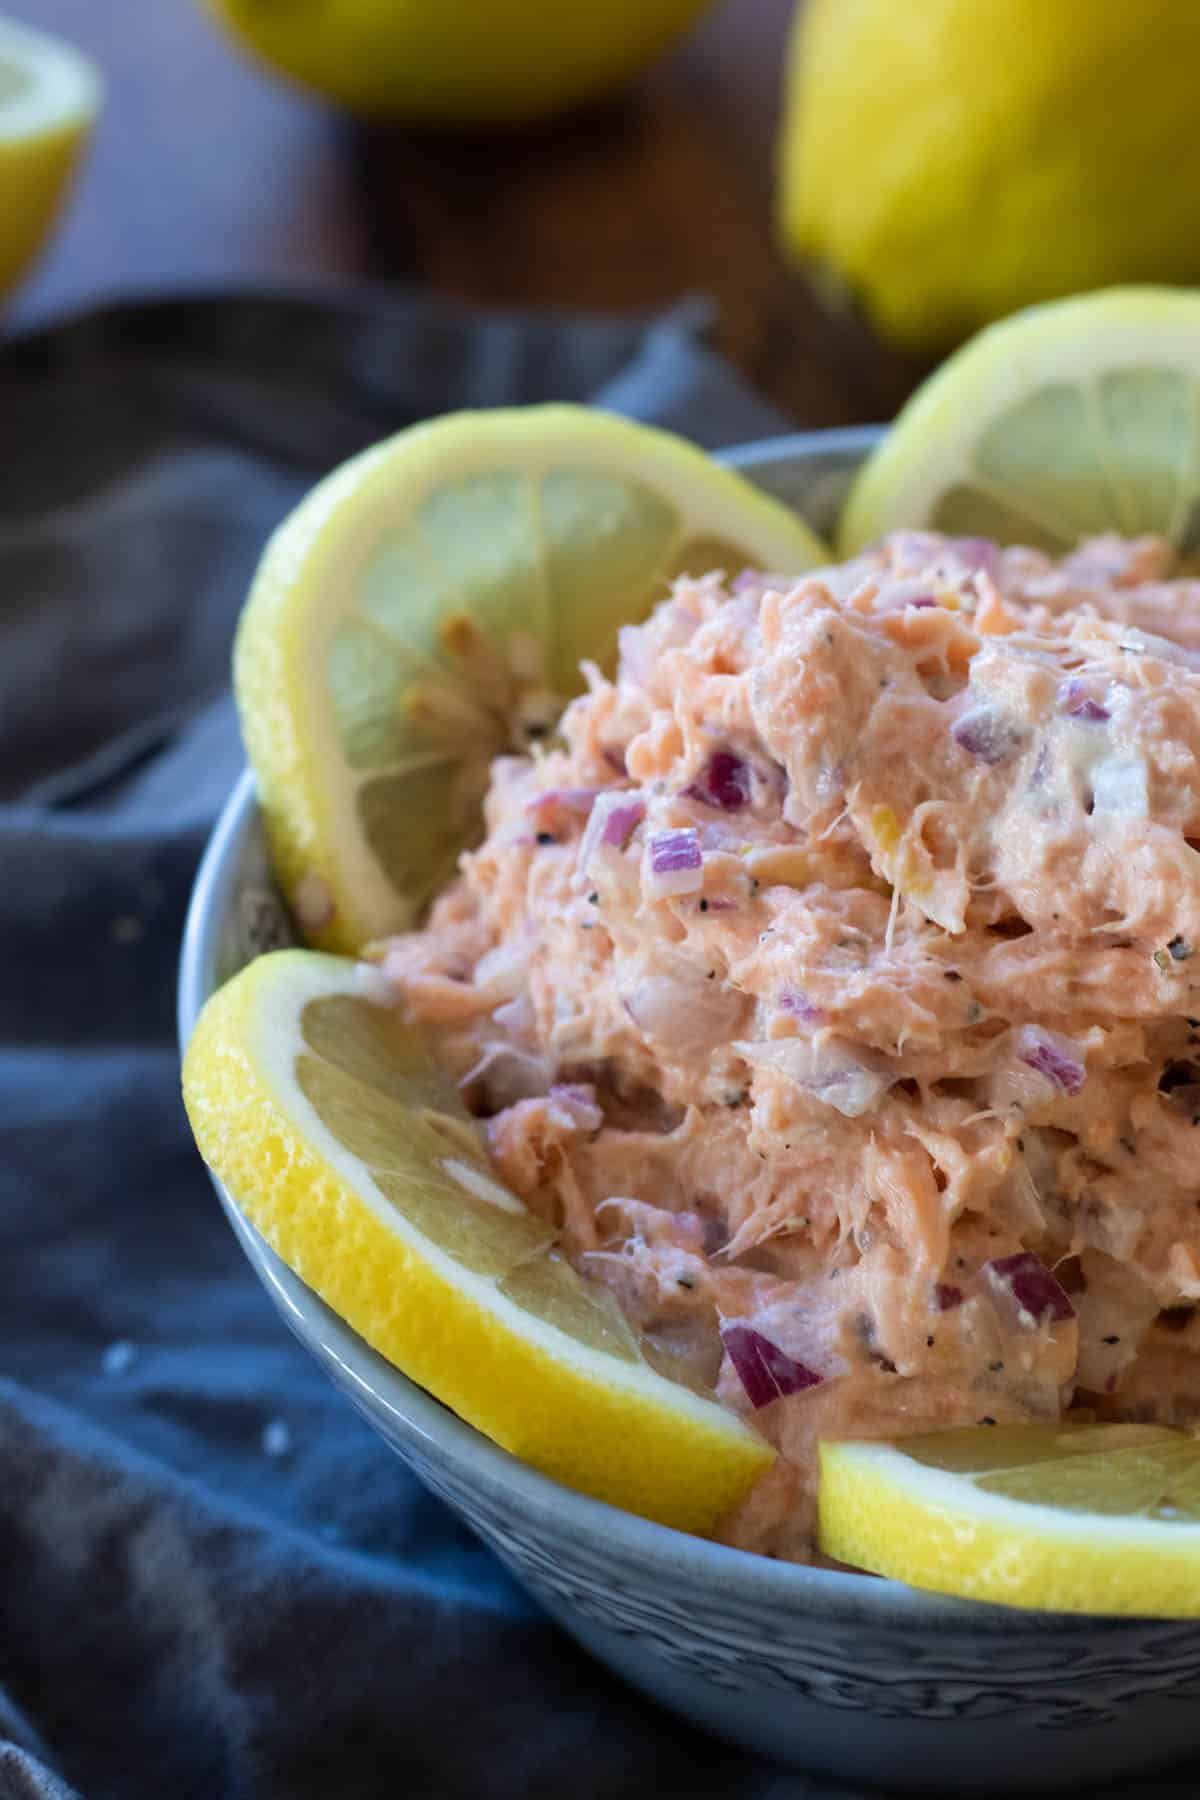 Smoked salmon pate in a bowl decorated with lemon slices.